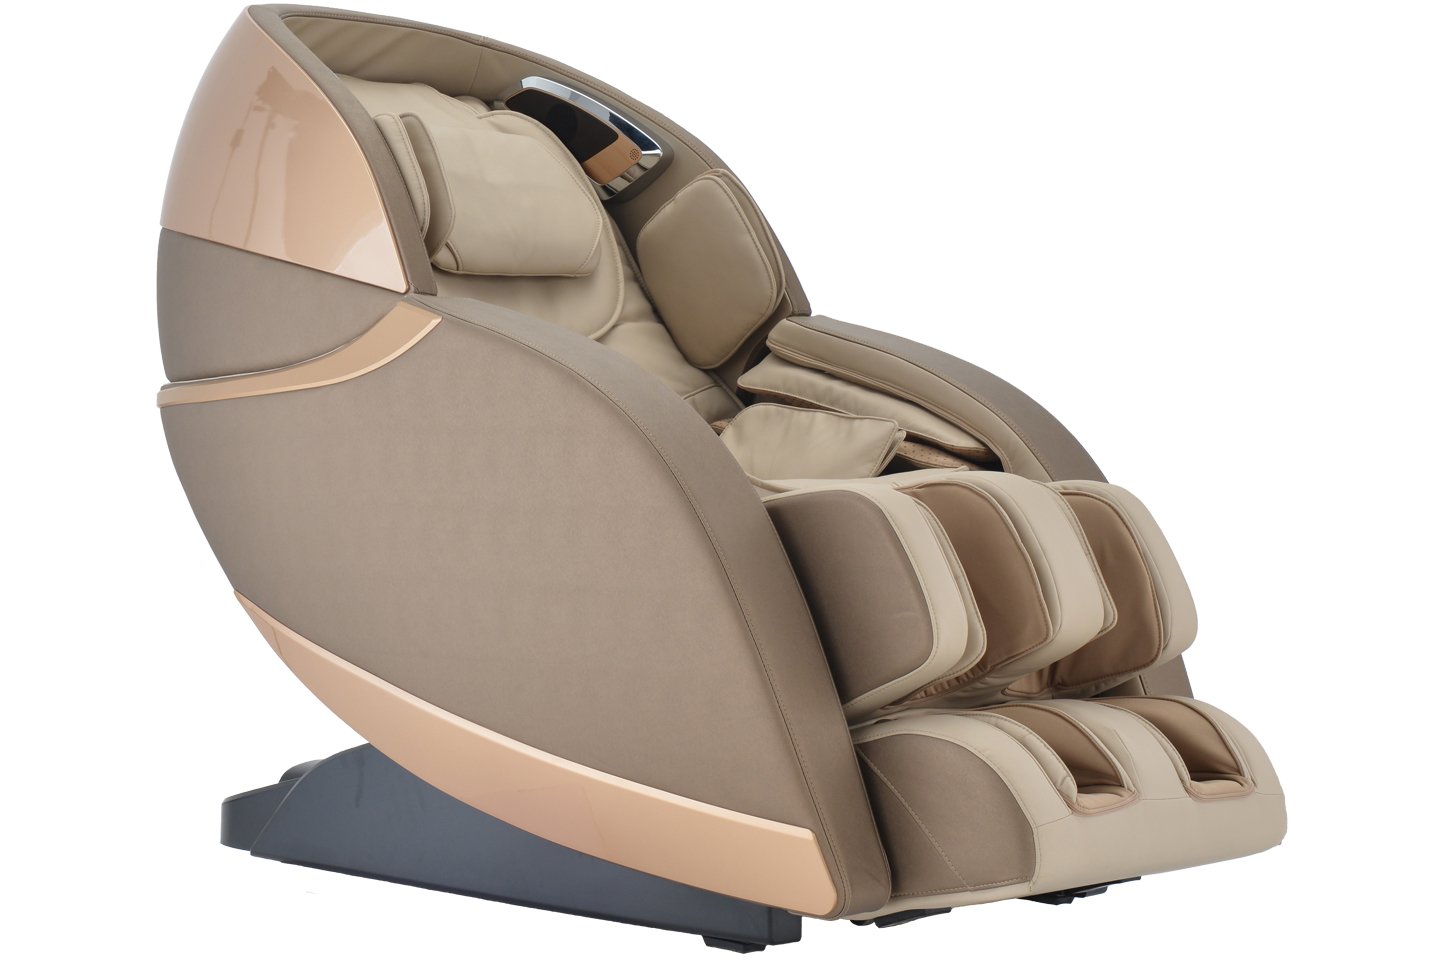 Infinity Evolution (Certified PreOwned) Massage Chair Store